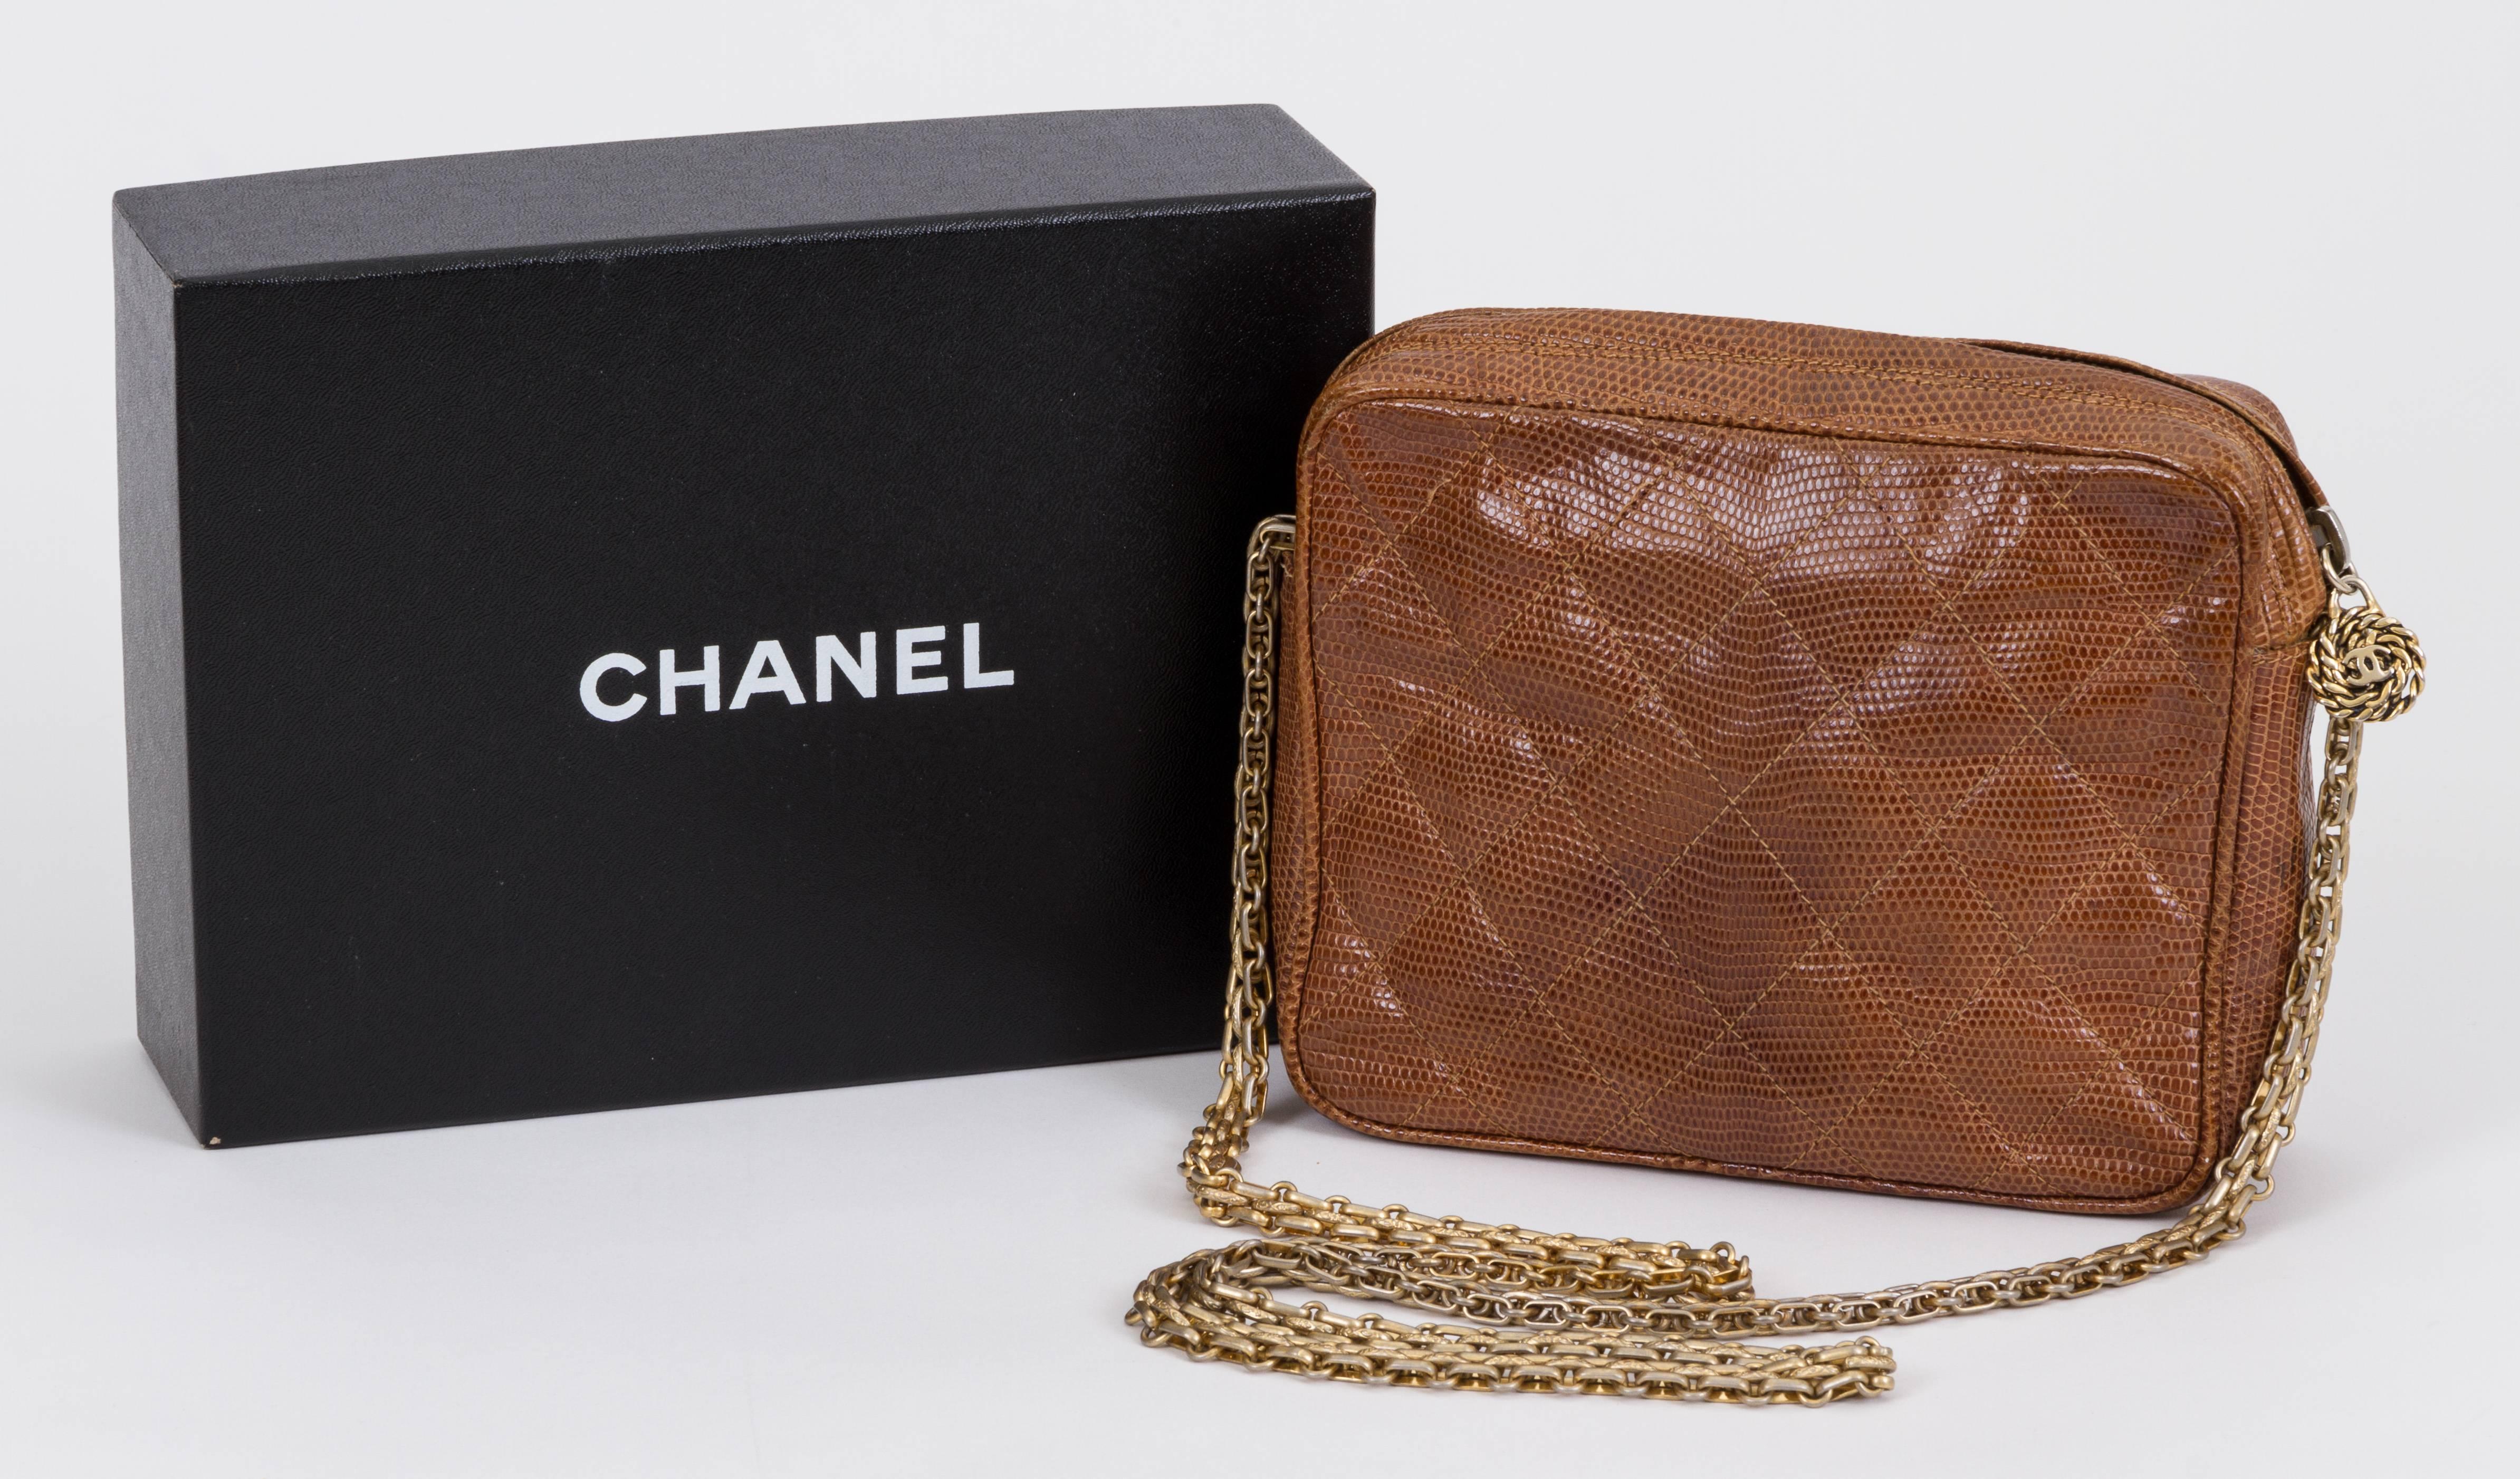 Chanel brown quilted lizard skin shoulder bag. Comes with hologram and original box. Repair to cut on side. Some stitching is loose.